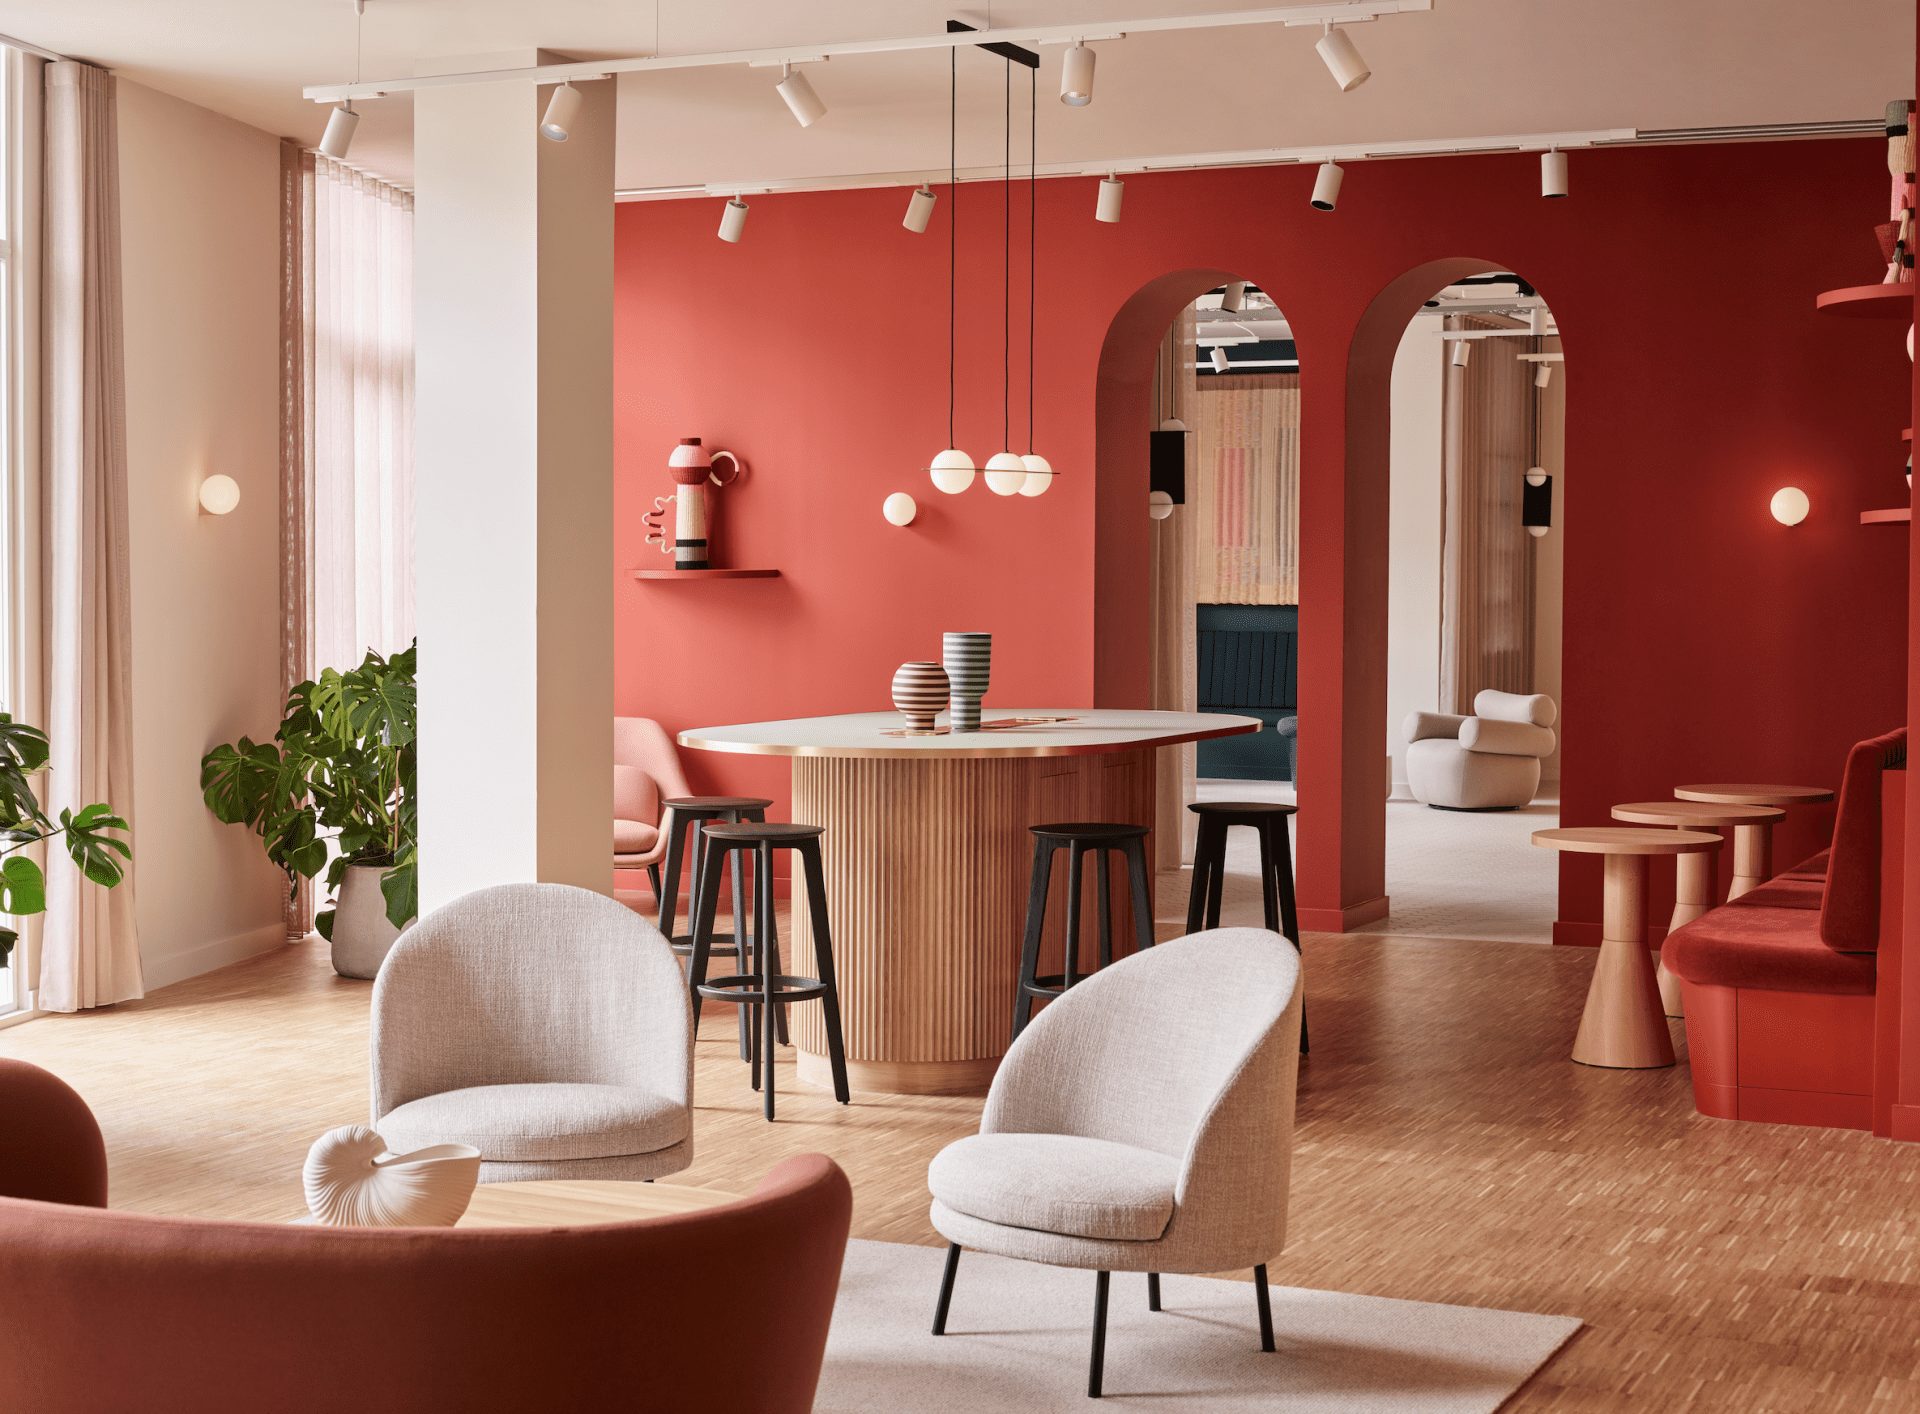 TOG, London, workspaces, coworking spaces, OnOffice magazine